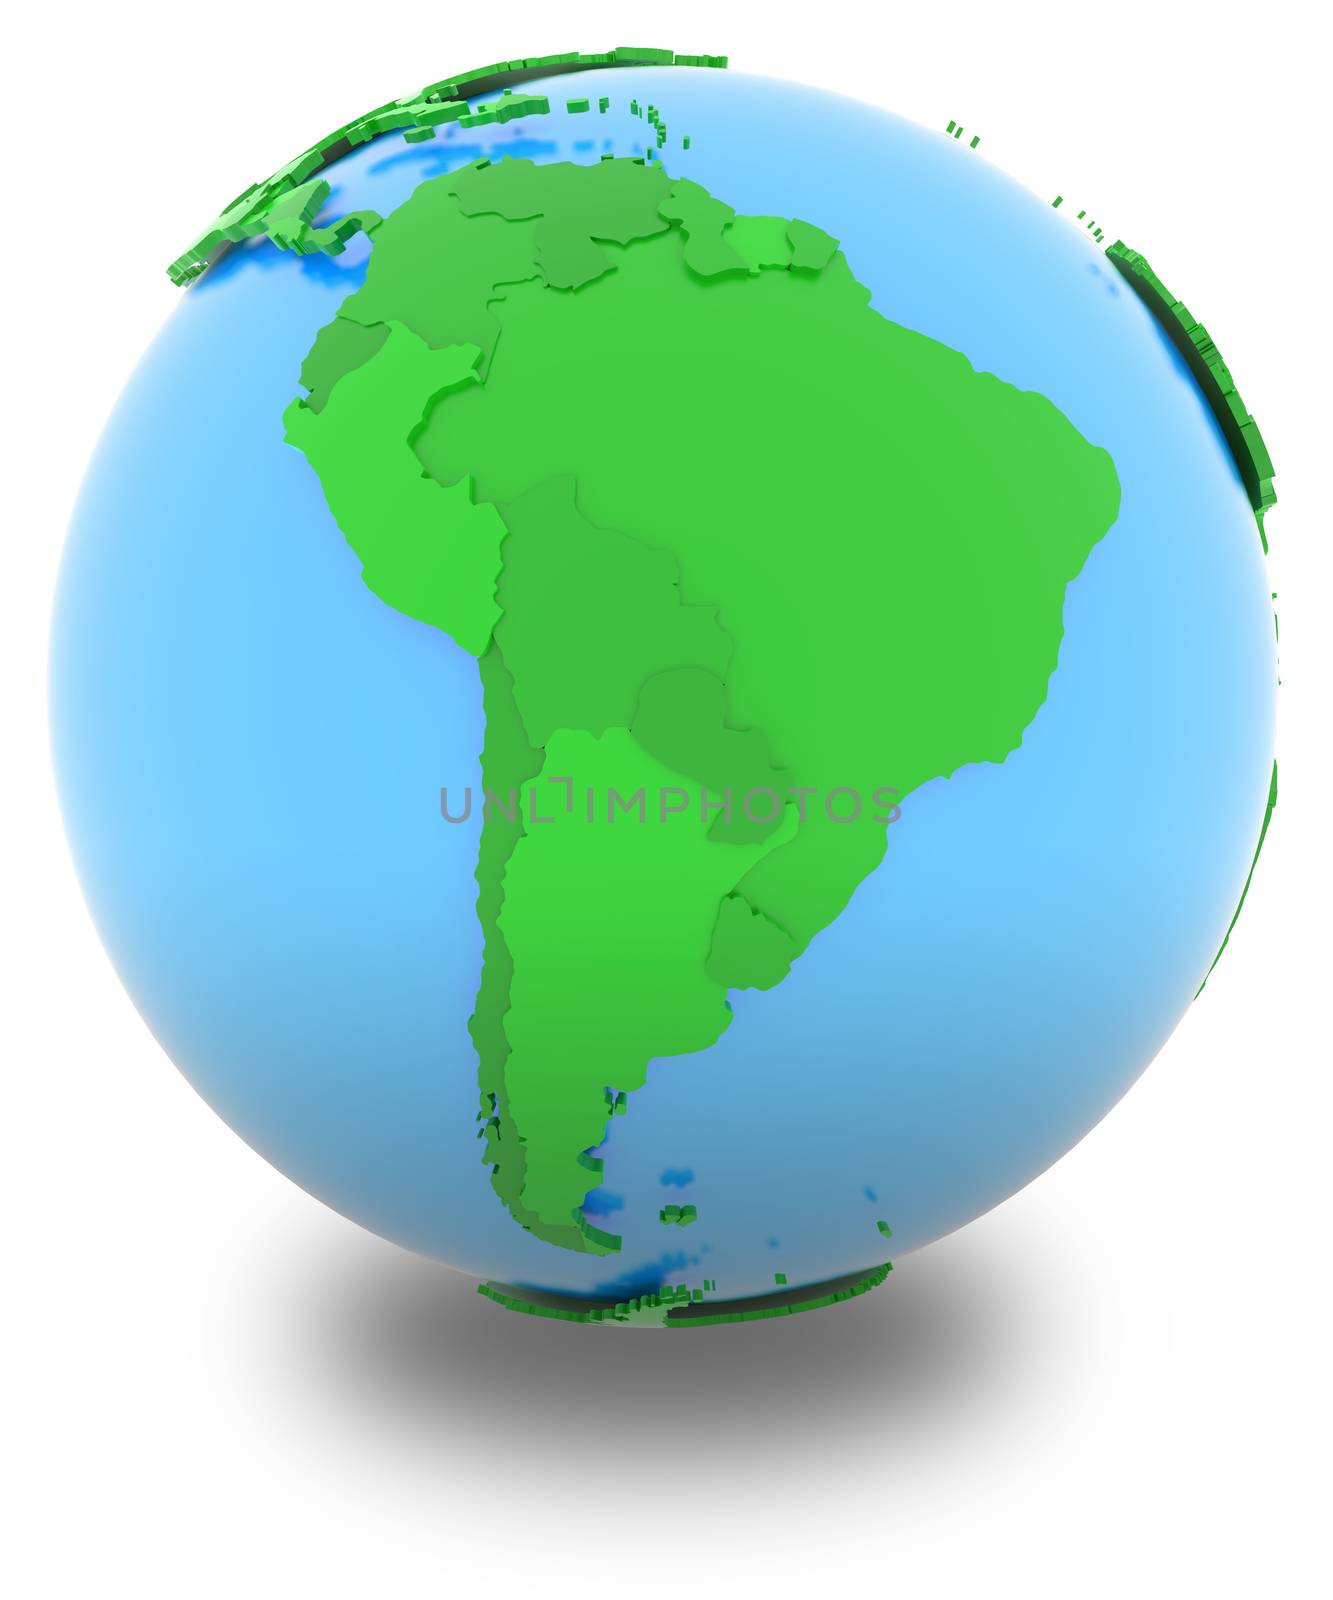 South America on the globe by Harvepino